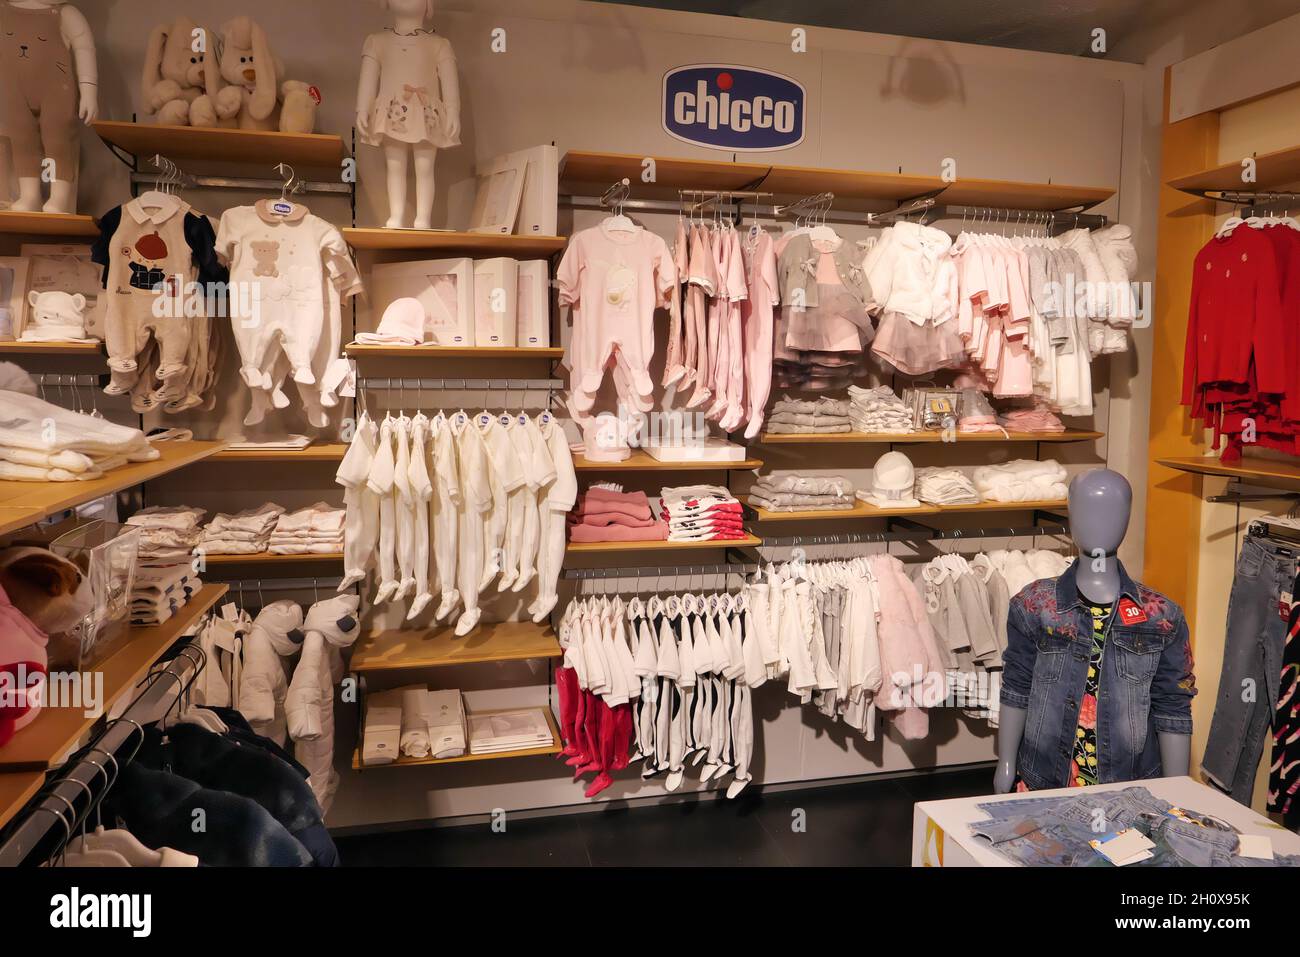 CHICCO CHILDREN'S CLOTHING ON DISPLAY INSIDE THE FASHION STORE Stock Photo  - Alamy